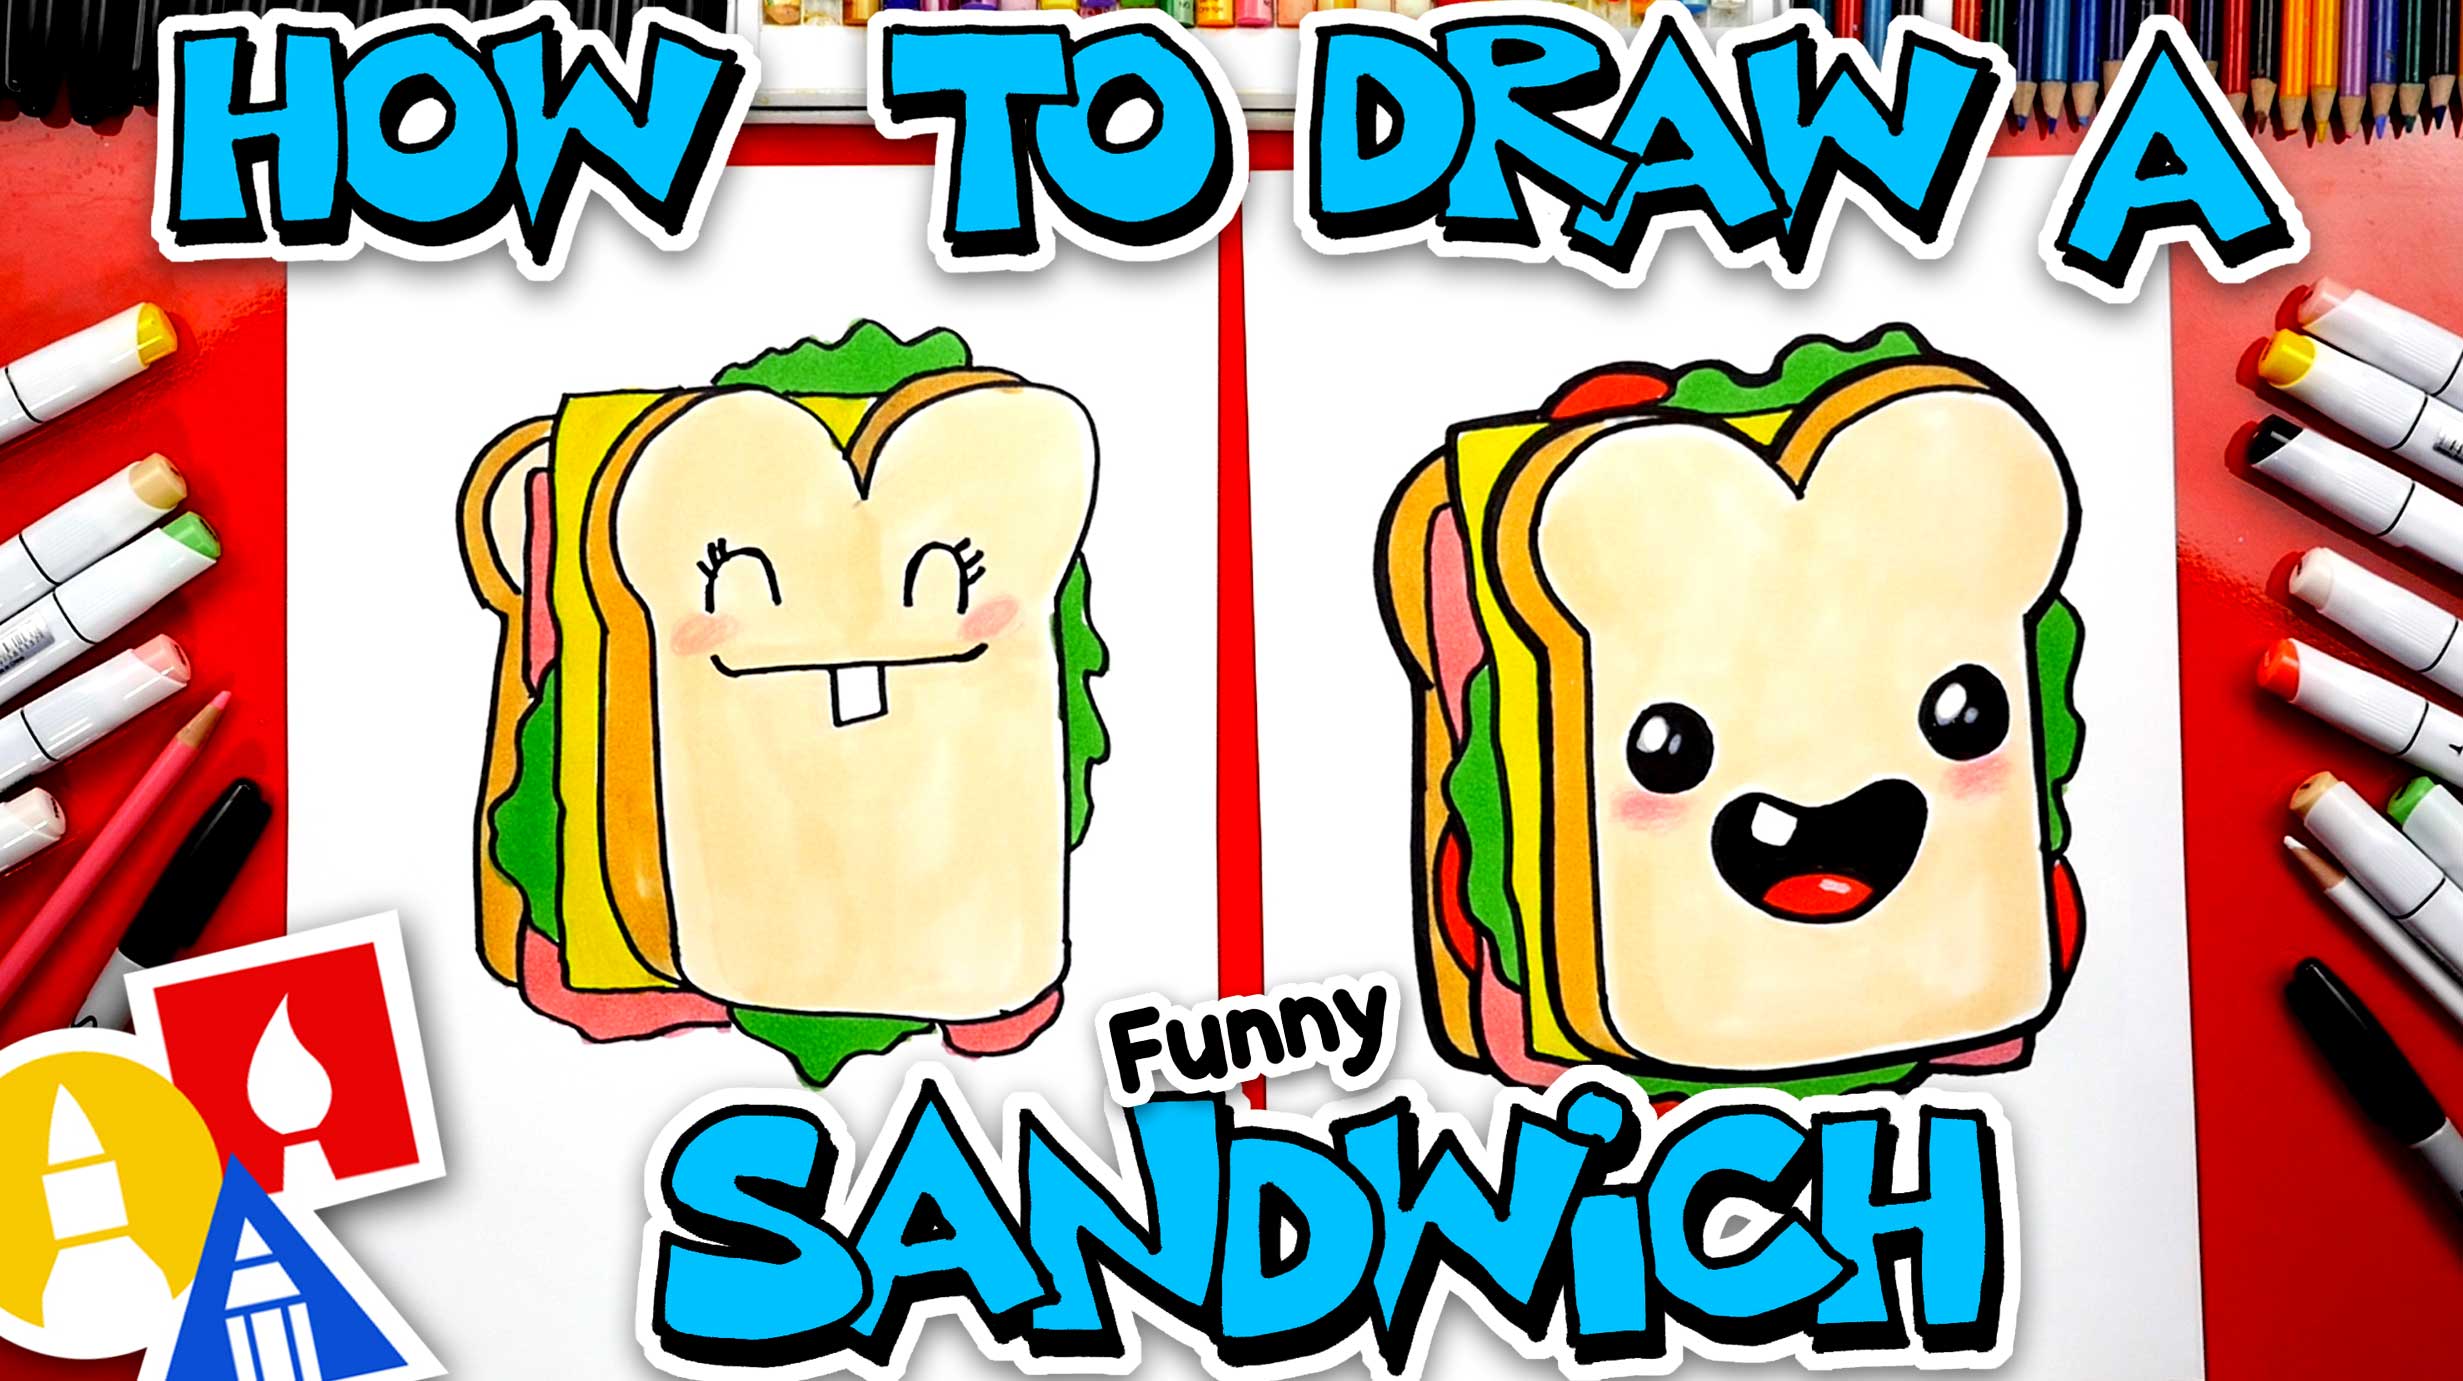 How To Draw A Funny Sandwich - Art For Kids Hub